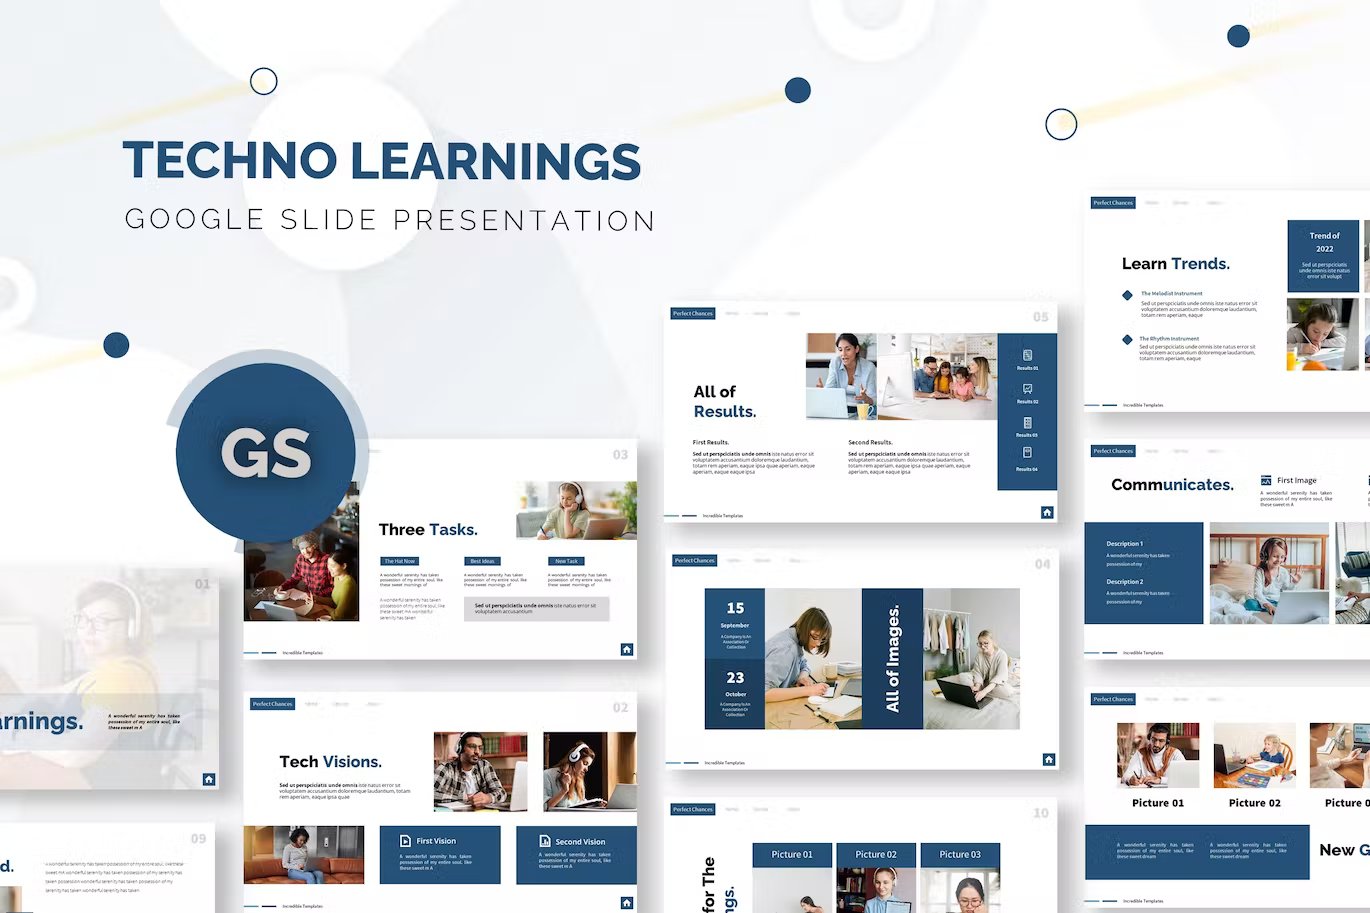 Blue lettering "Techno Learnings Google Slide Presentation" and different presentation templates on a gray background.